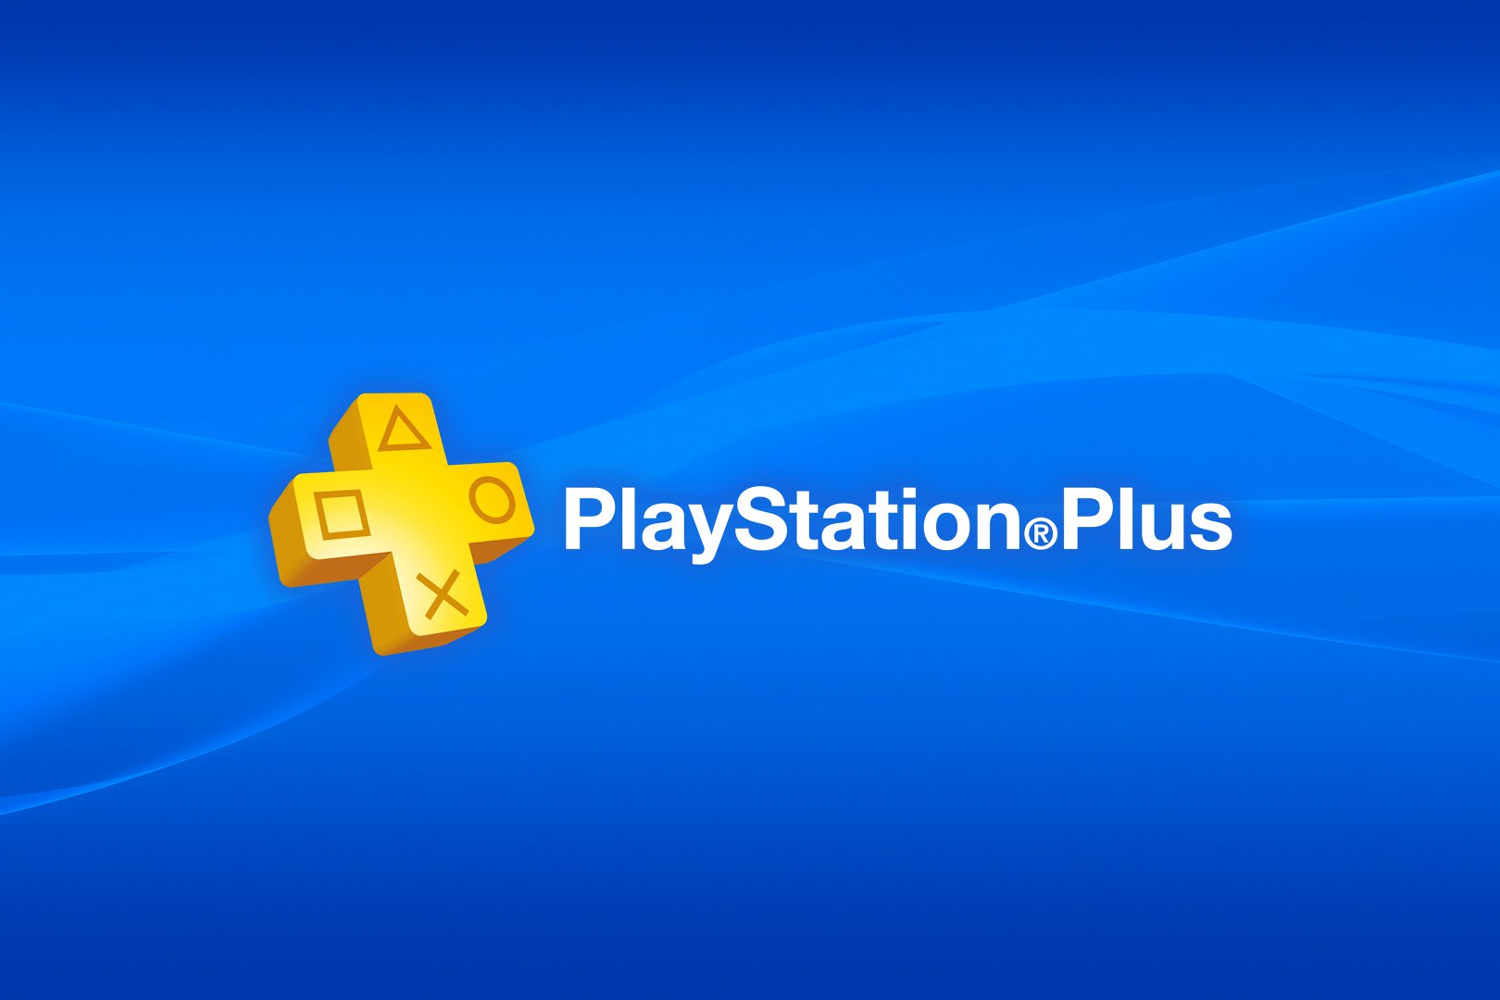 PlayStation Plus Deals: Get Access to Sony's Subscription Offering